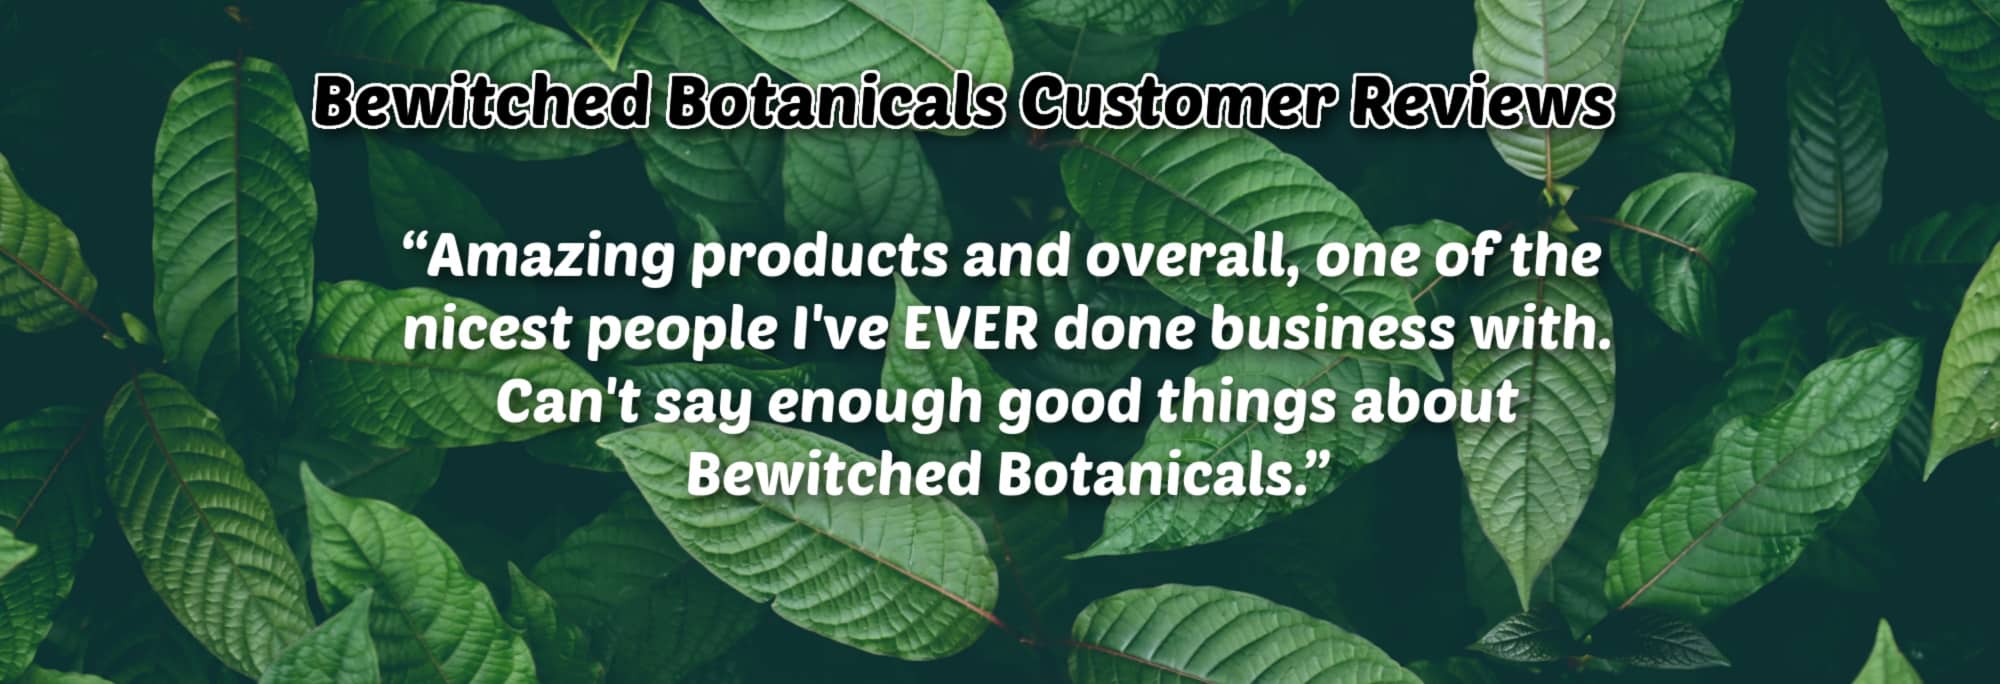 image of bewitched botanicals customer reviews